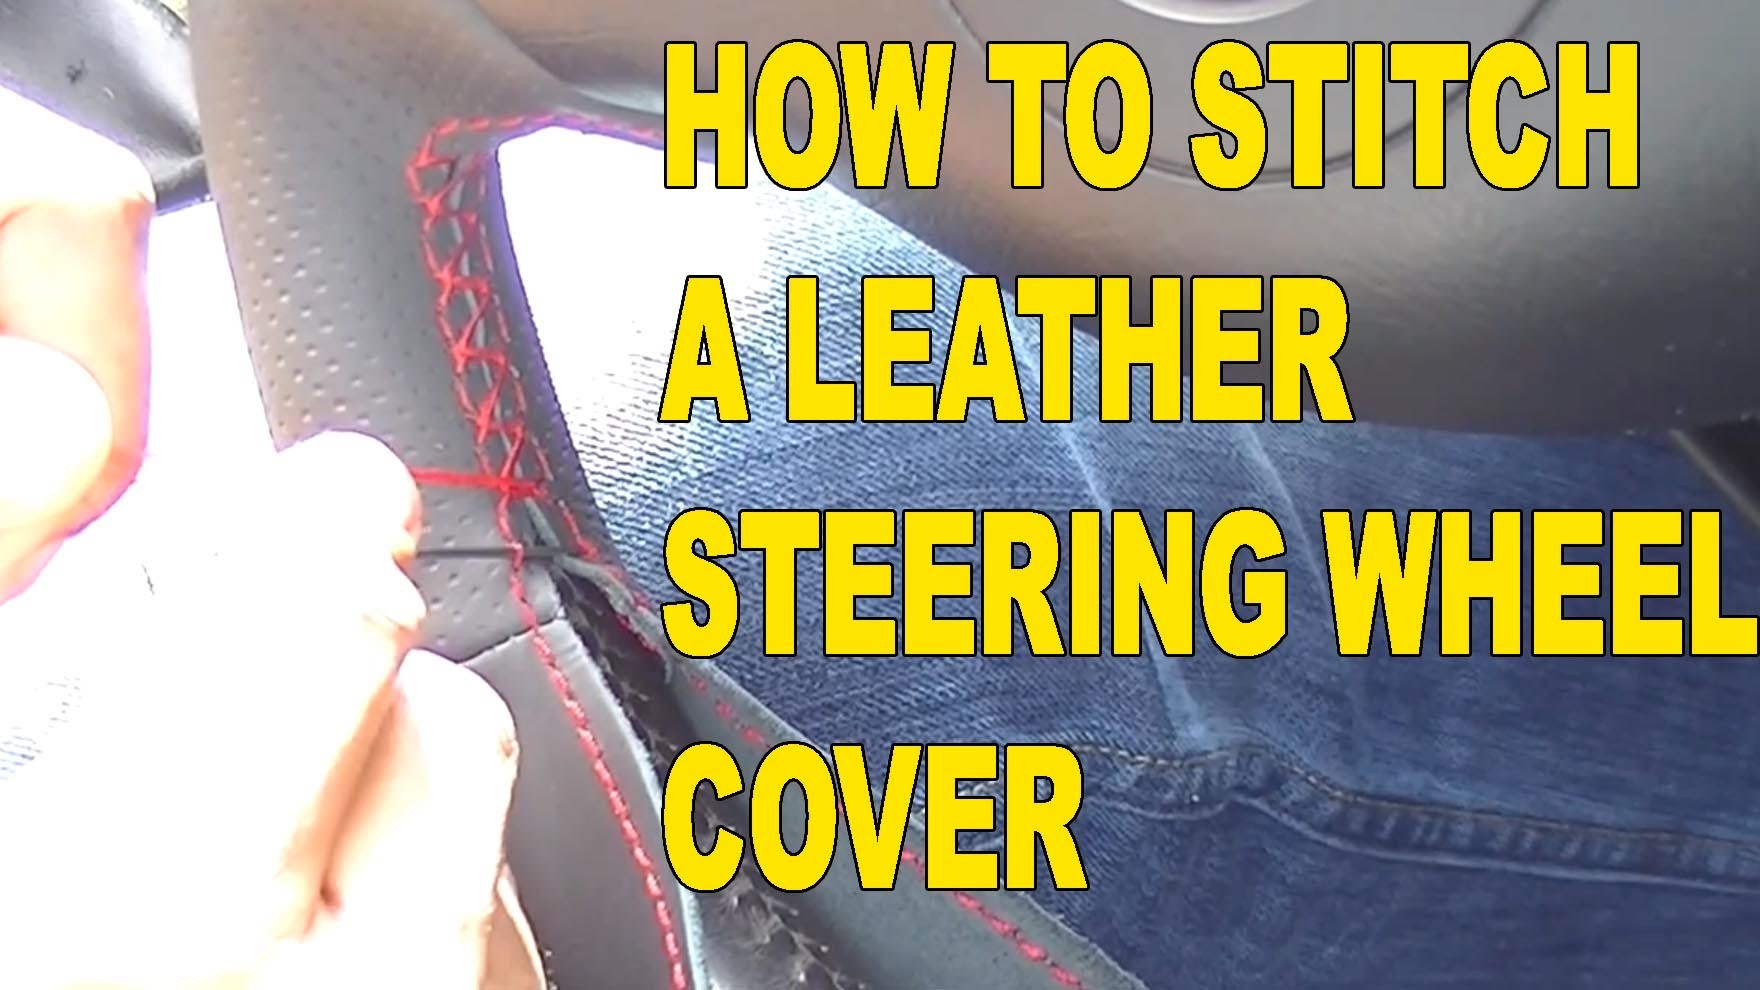 How to Stitch a Race Leather Steering Wheel Cover